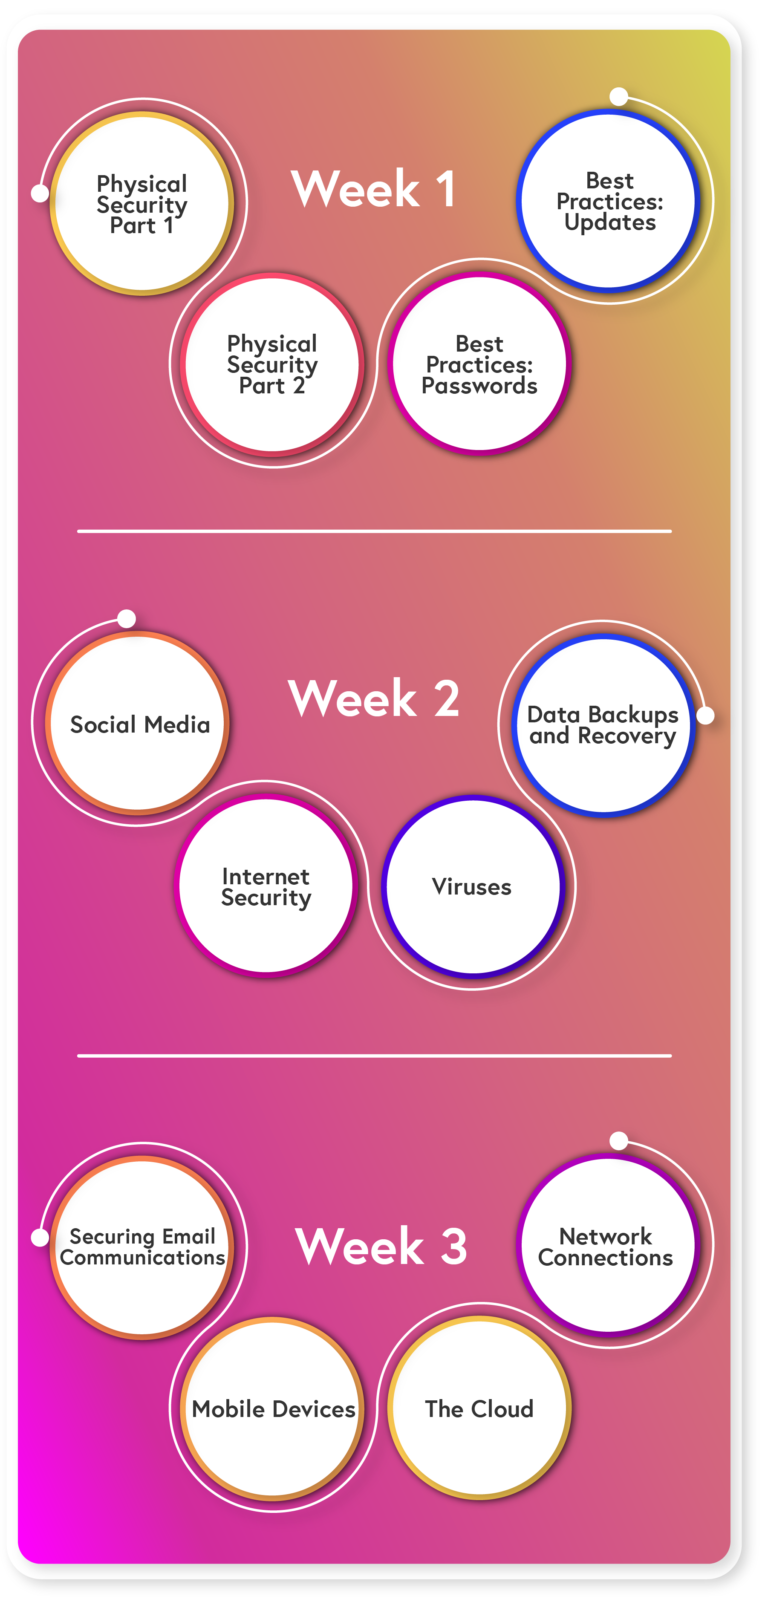 Week 1: Physical Security part 1 and part 2, Best Practices: Passwords and Updates Week 2: Social Media, Internet Security, Viruses, Data Backups and Recovery, Week 3: Securing Email Communication, Mobile Devices, The Cloud, and Network Connections 